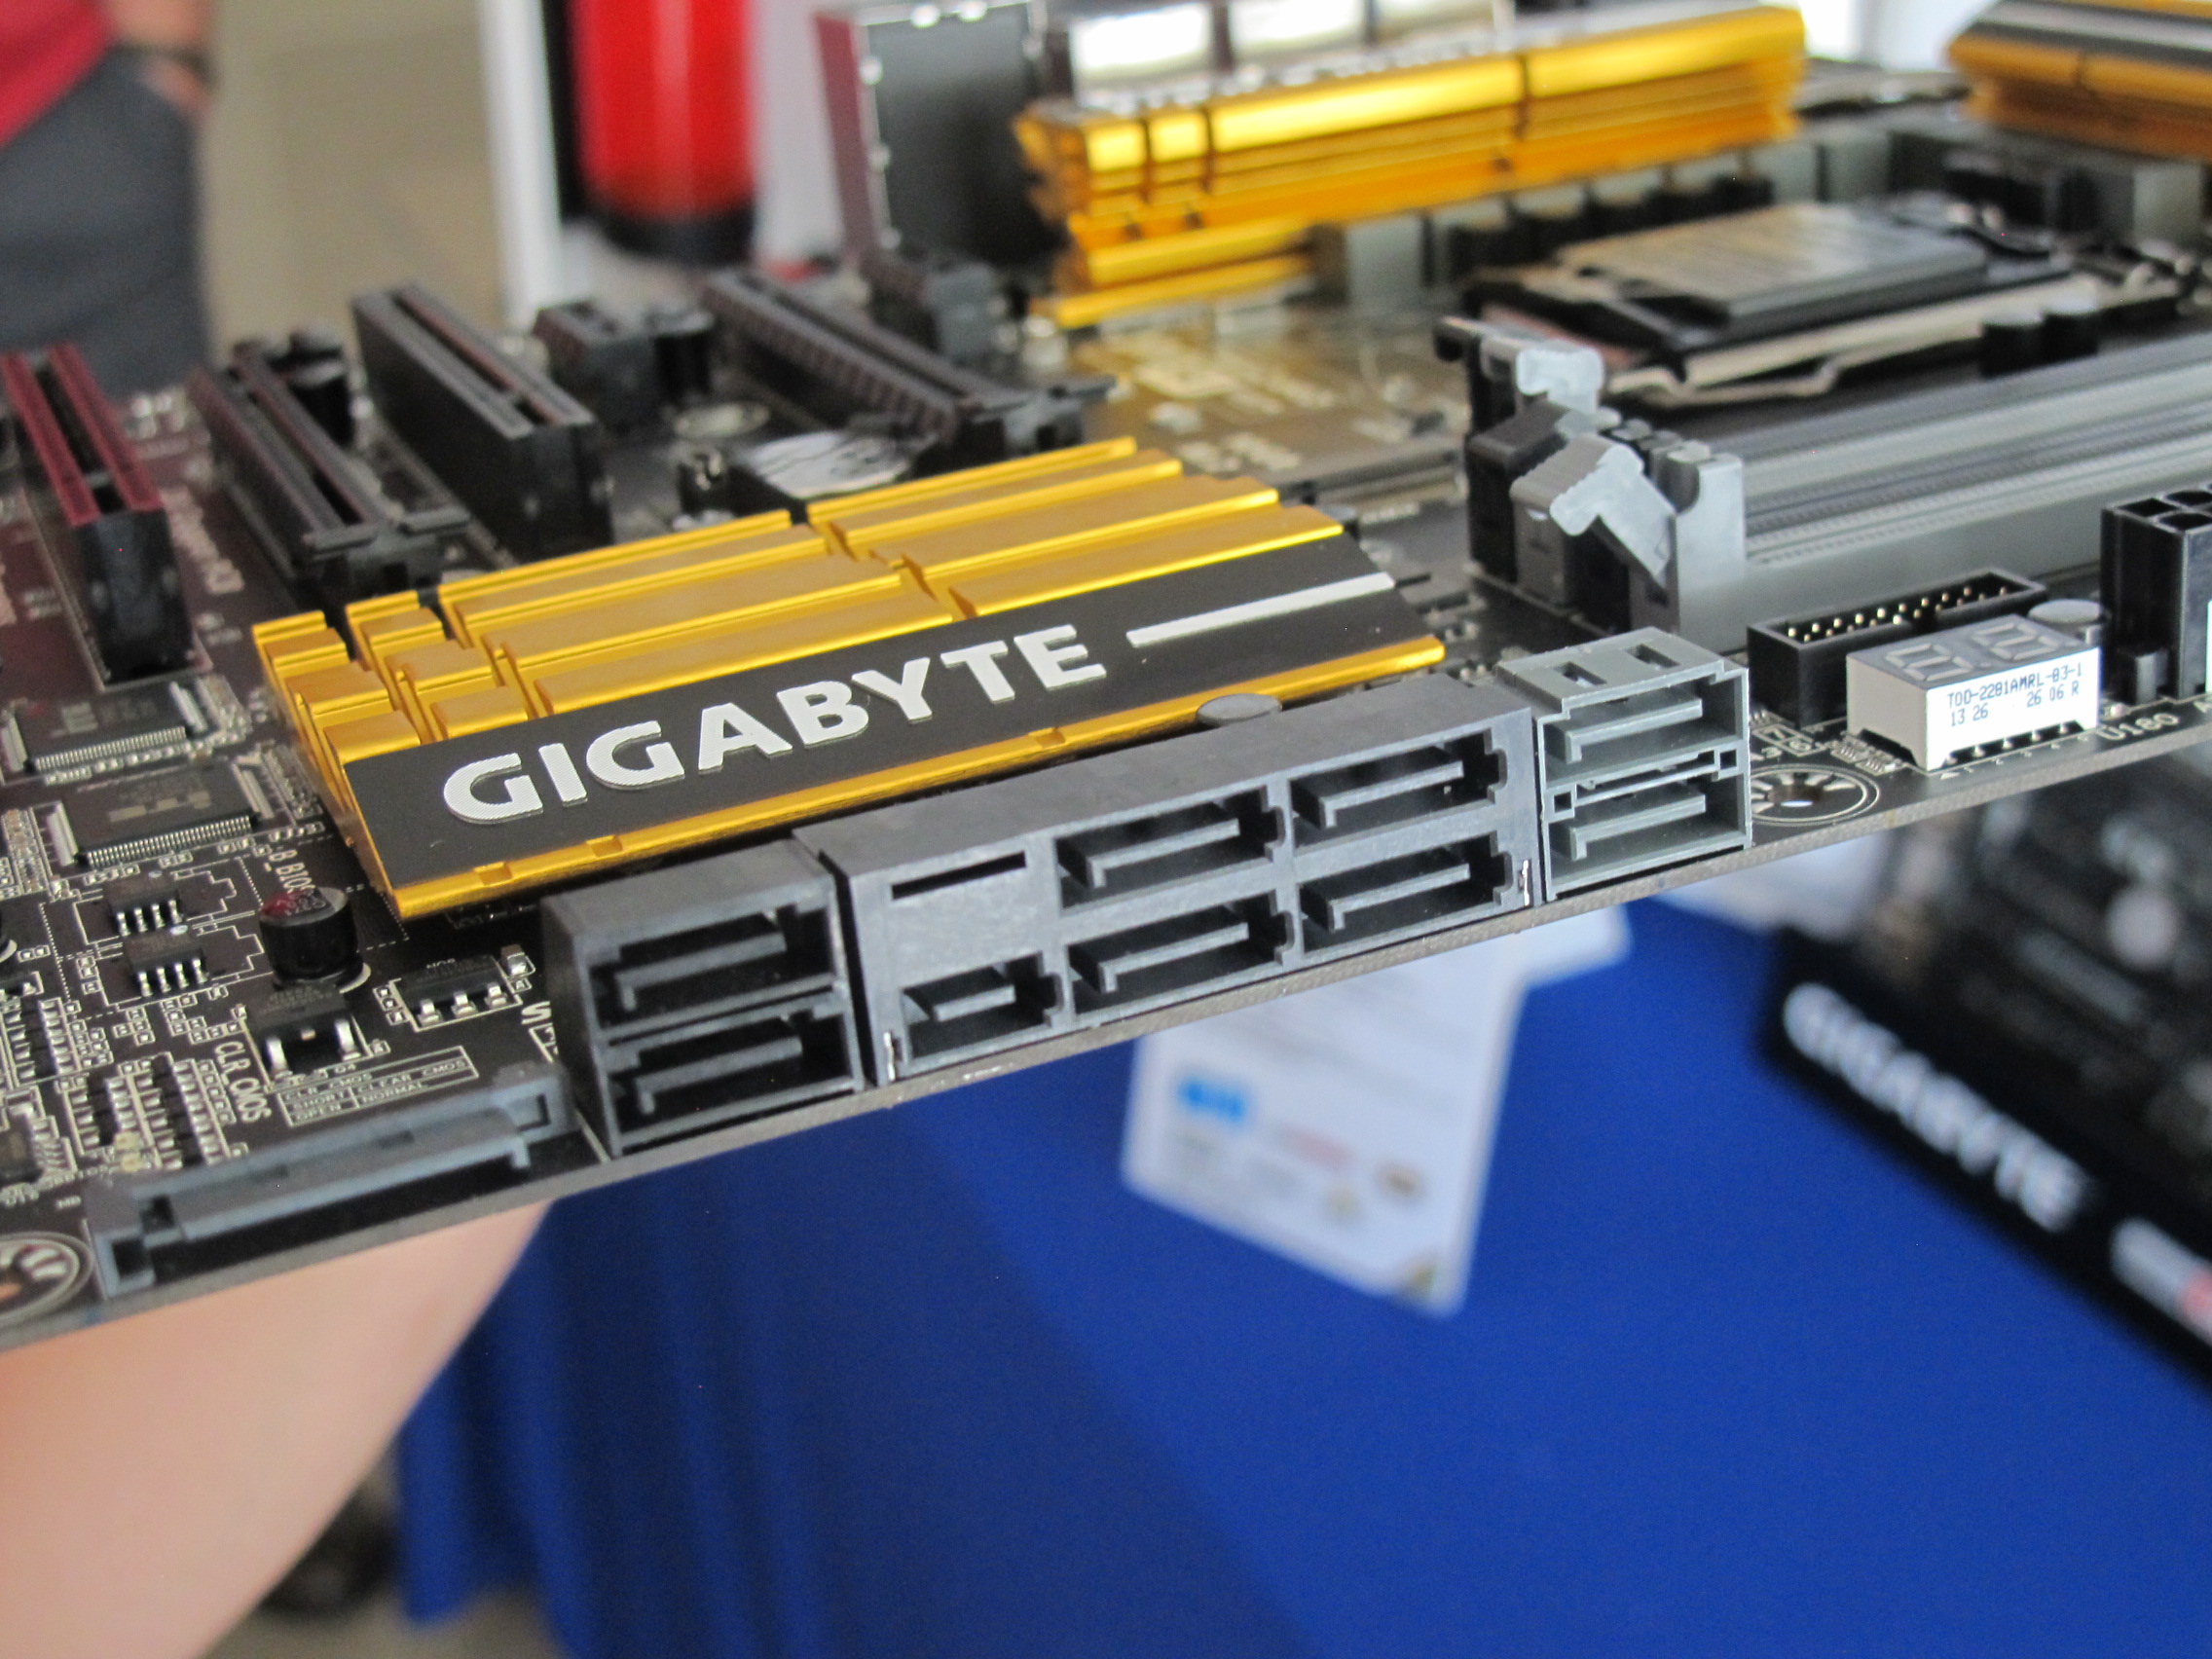 GIGABYTE Z97X-UD5H Review: Choose Your Storage Option